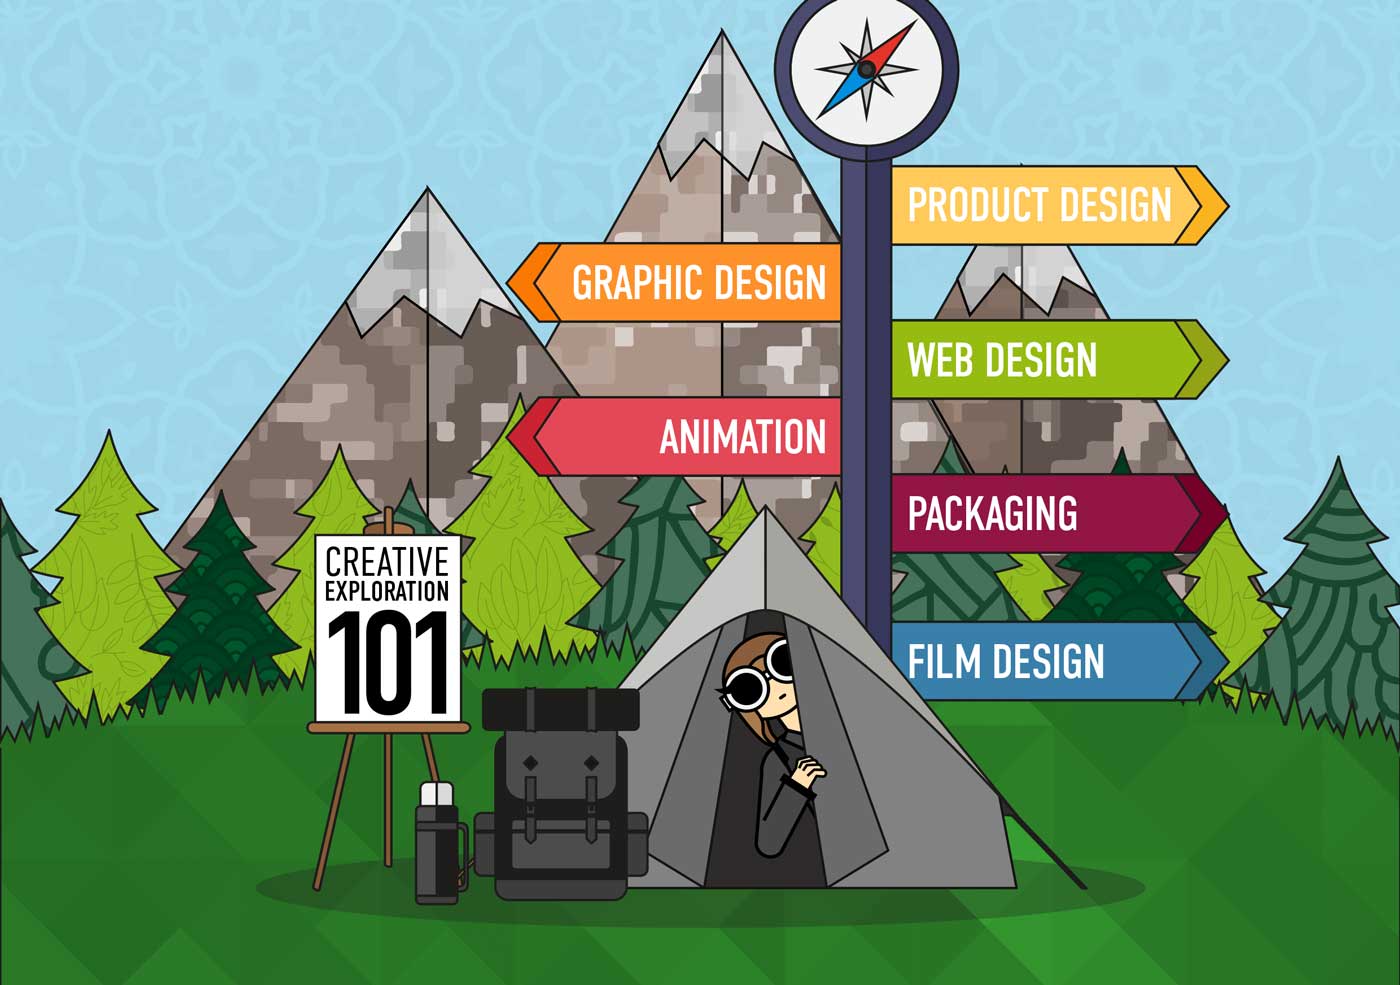 Amelia in a tent with a sign showing different designer paths including product design and animation